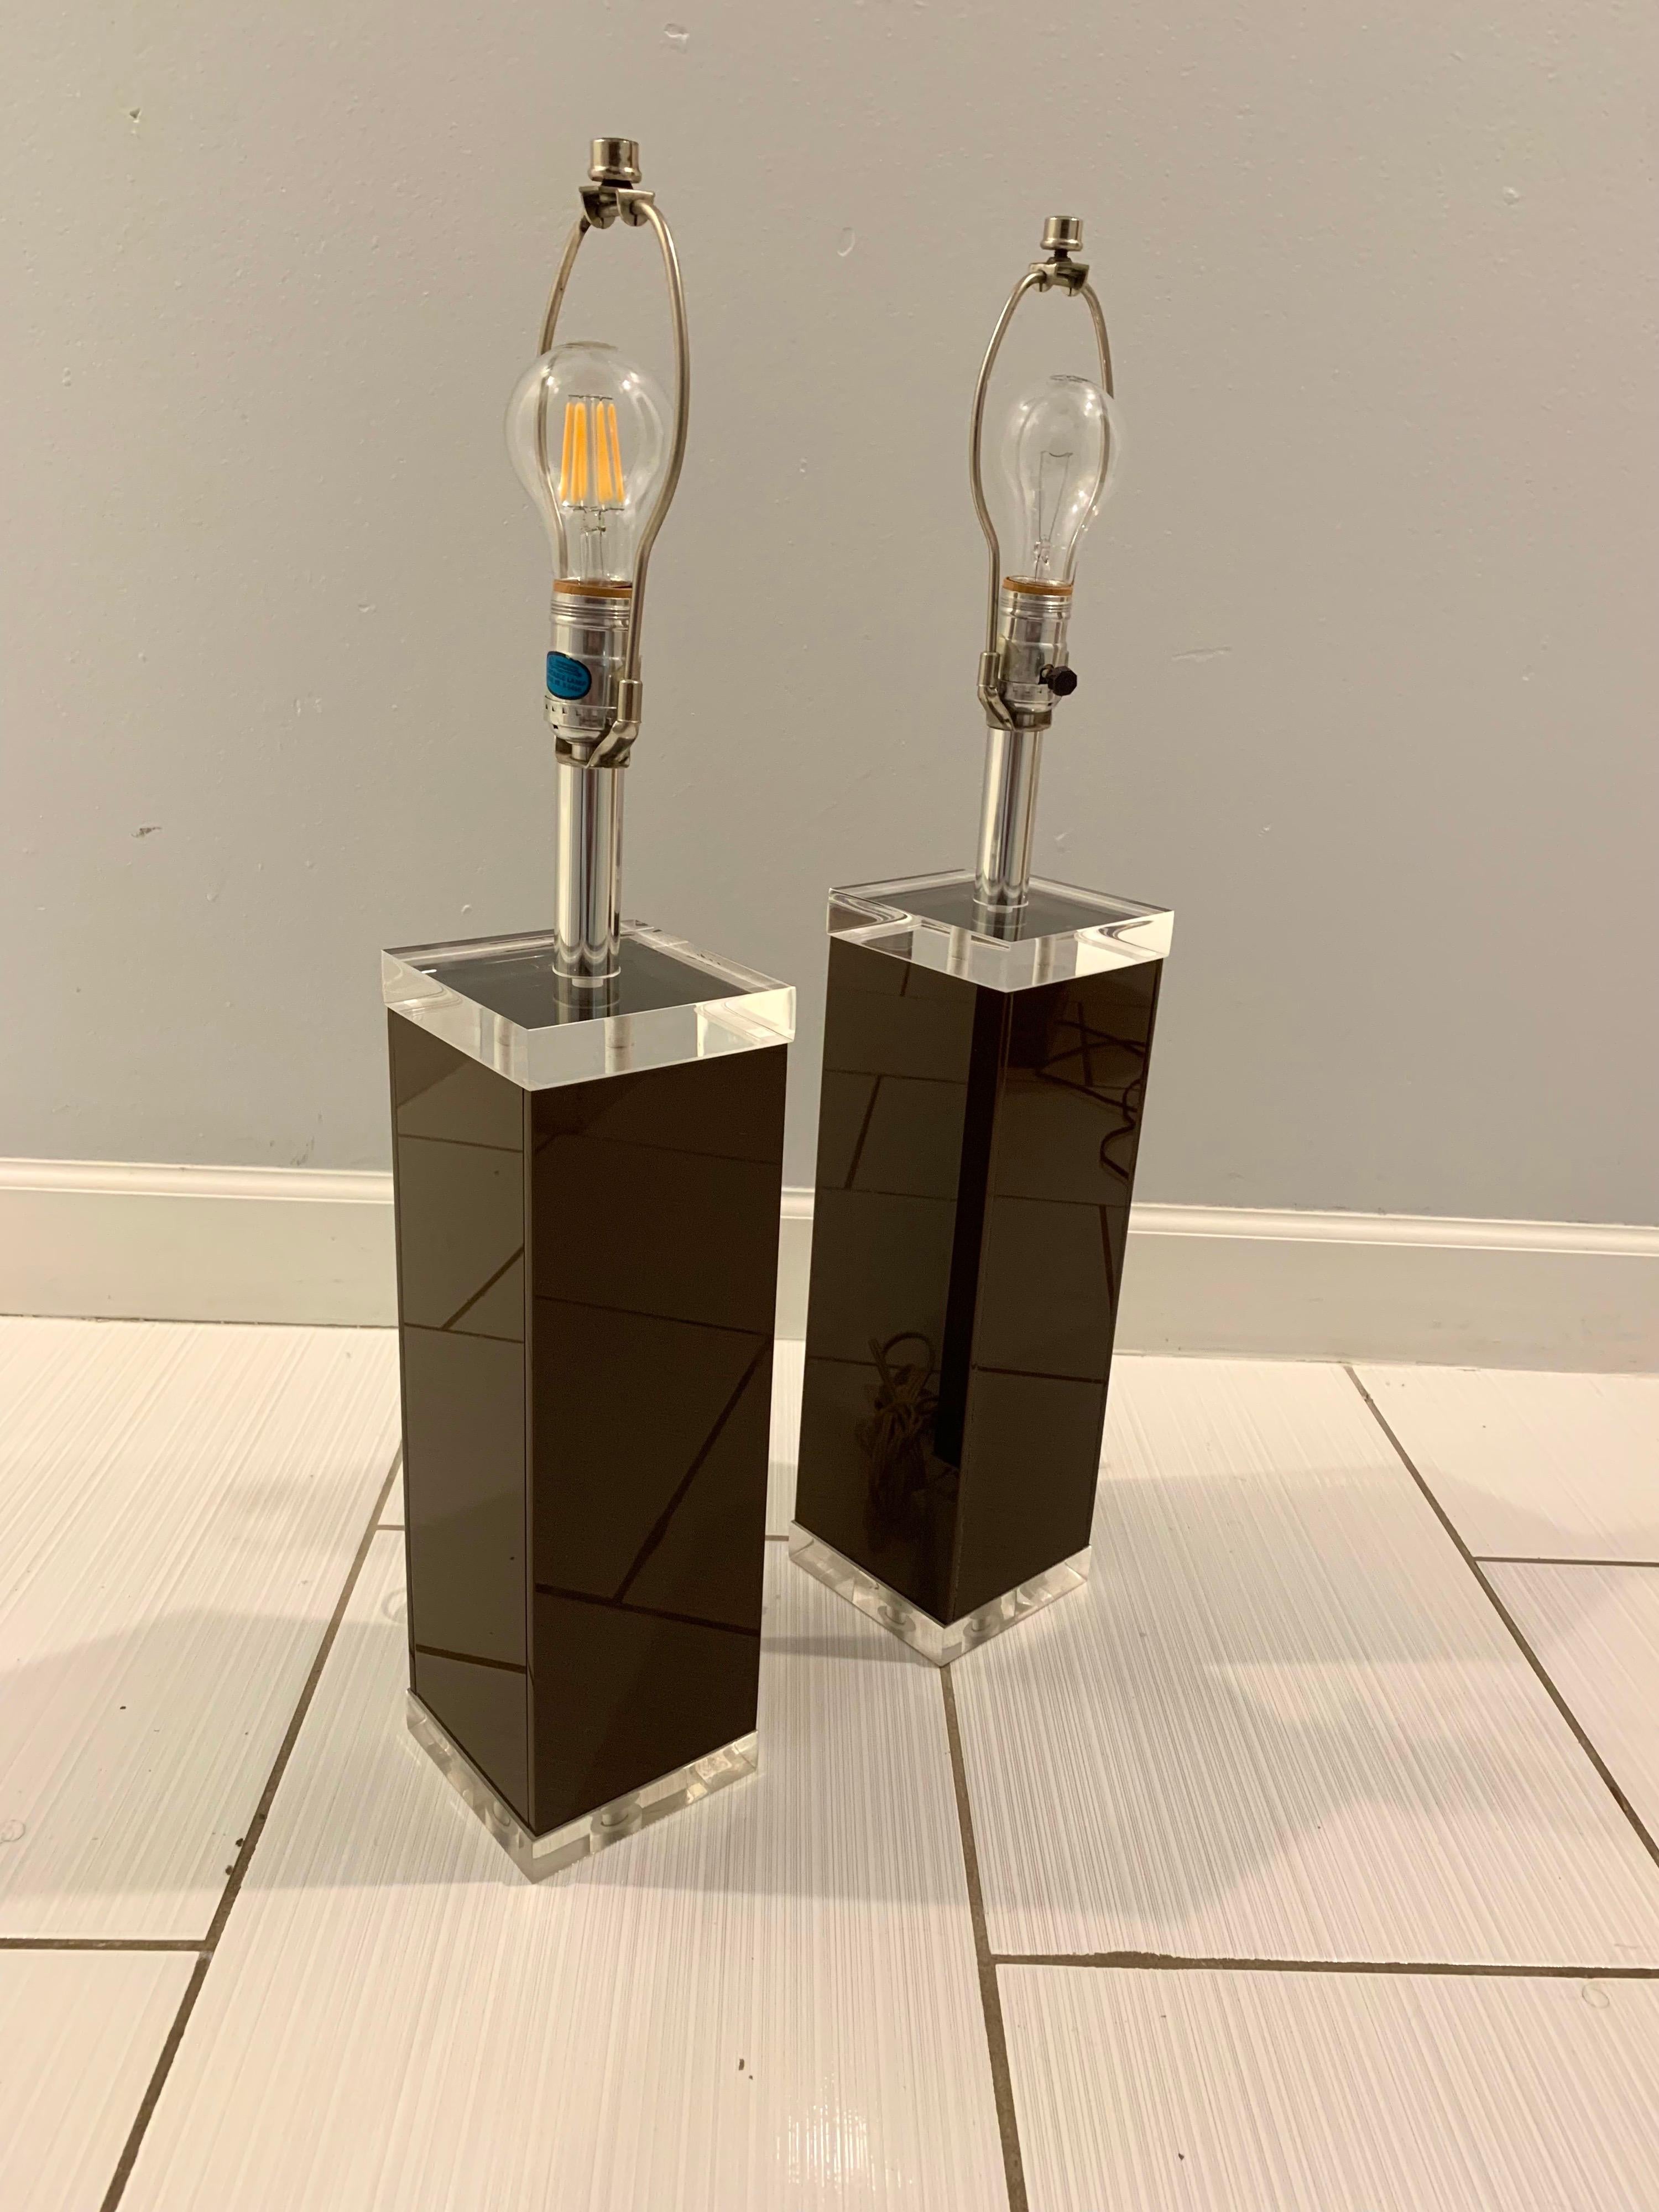 Gorgeous pair of lucite lamps designed and hand crafted by George Bullio. Dark rich chocolate colored lucite framed on top and bottom with crystal clear lucite blocks. Chrome stand to hold the bulb and shade. Refined and clean look. Would fit well